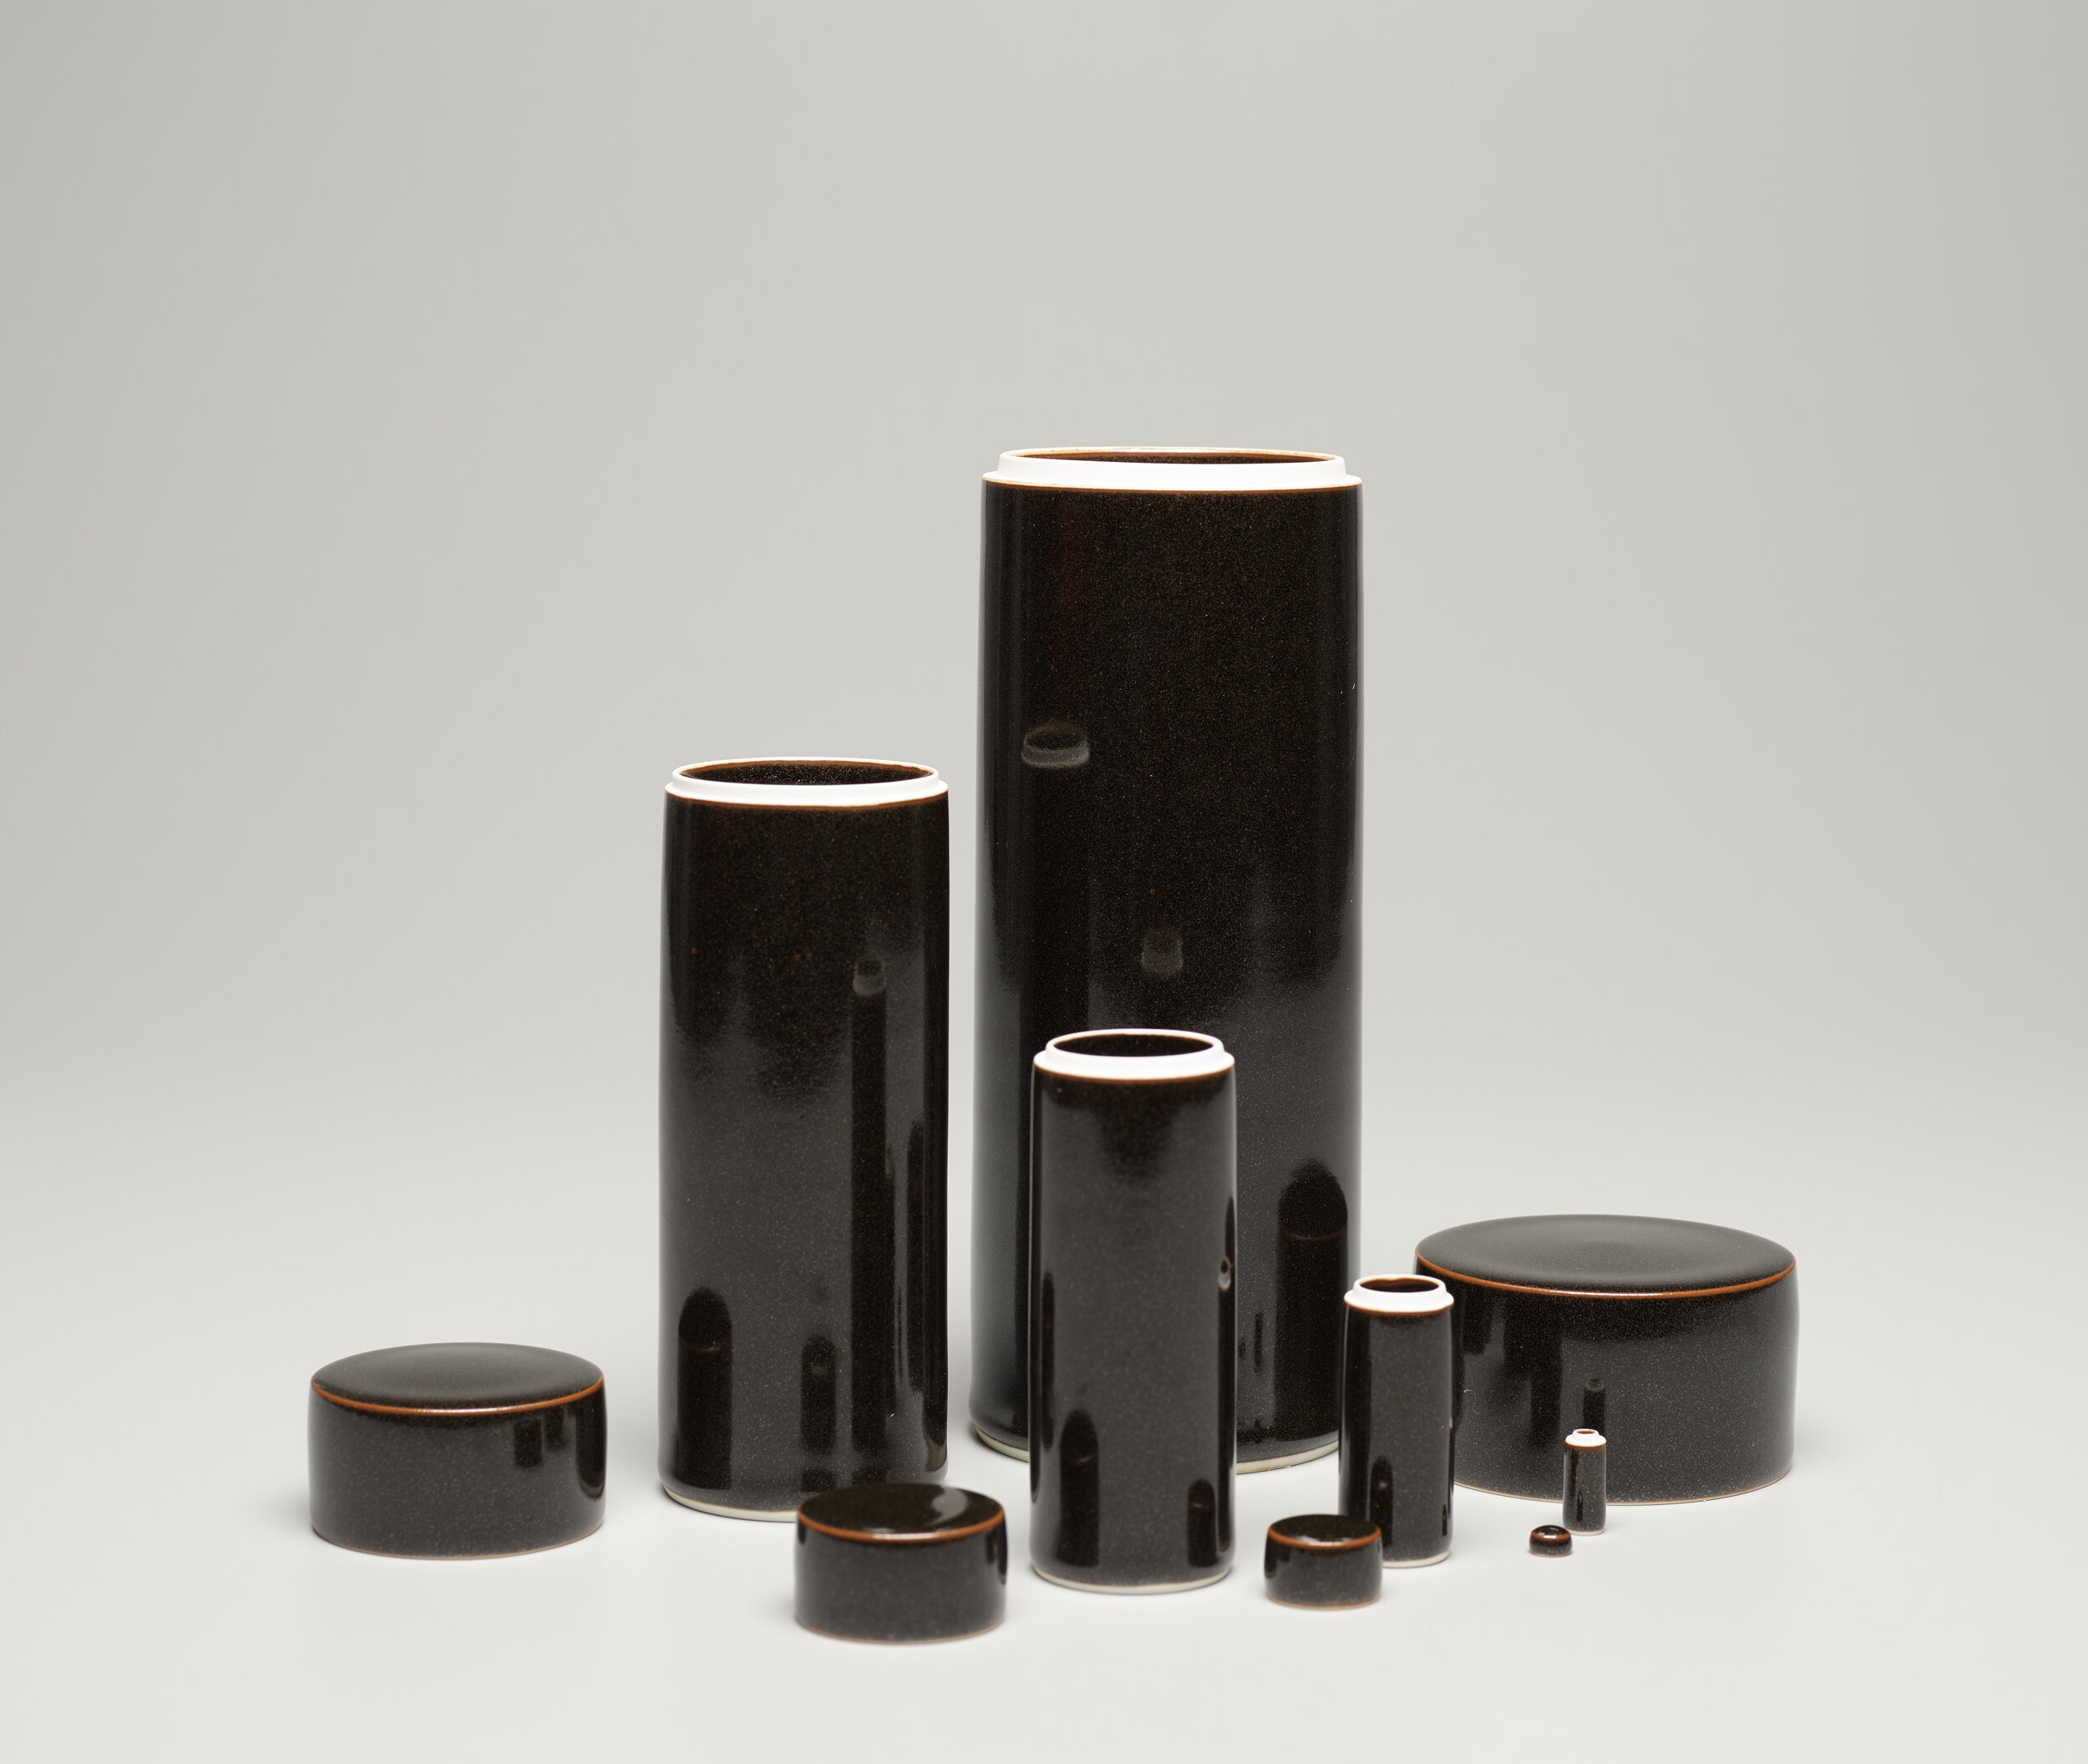  Yagi Akira, Five Cylindrical Nesting Boxes, 2004, porcelain with black glaze, Gift of Halsey and Alice North in honor of Yagi Sakiyo, © unknown, research required, 2018.27.1a-e 